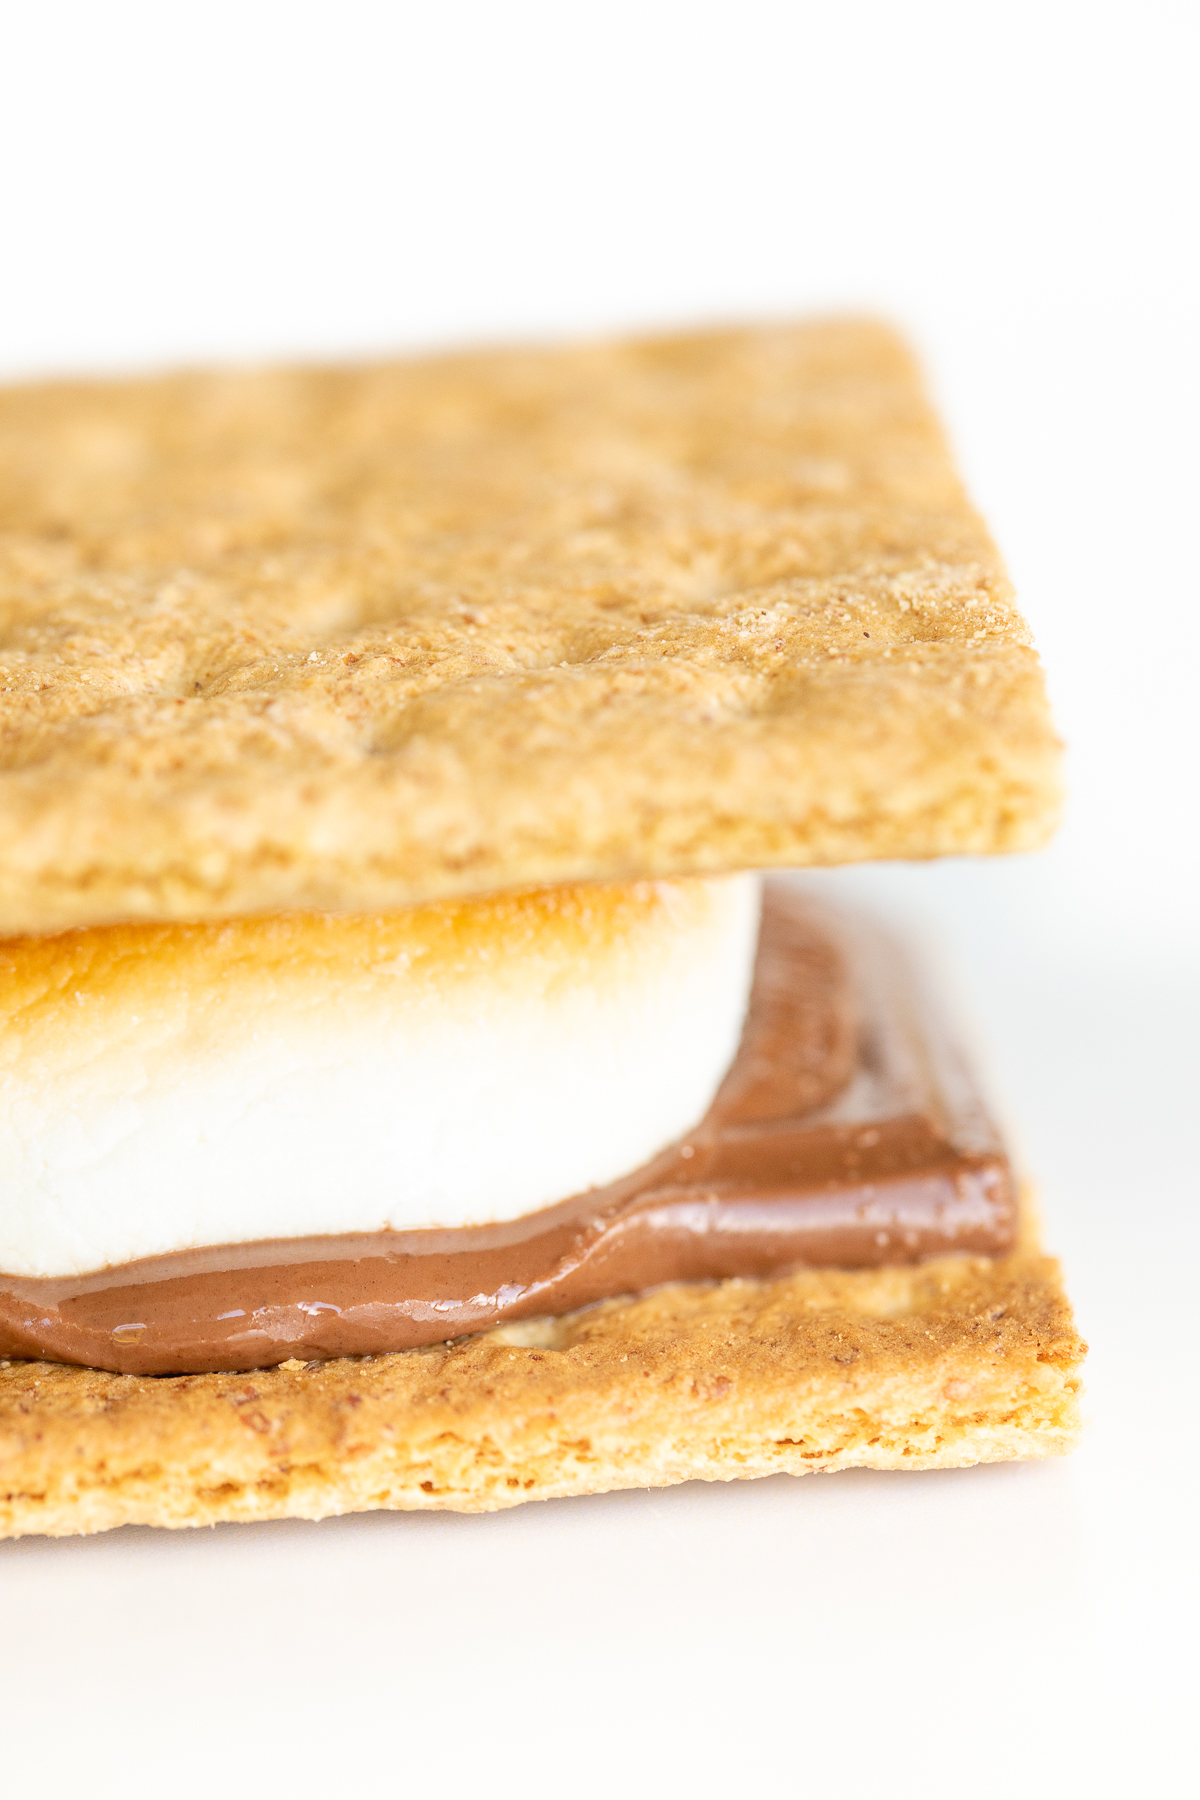 An oven-baked s'mores with graham cracker, chocolate, and marshmallow.